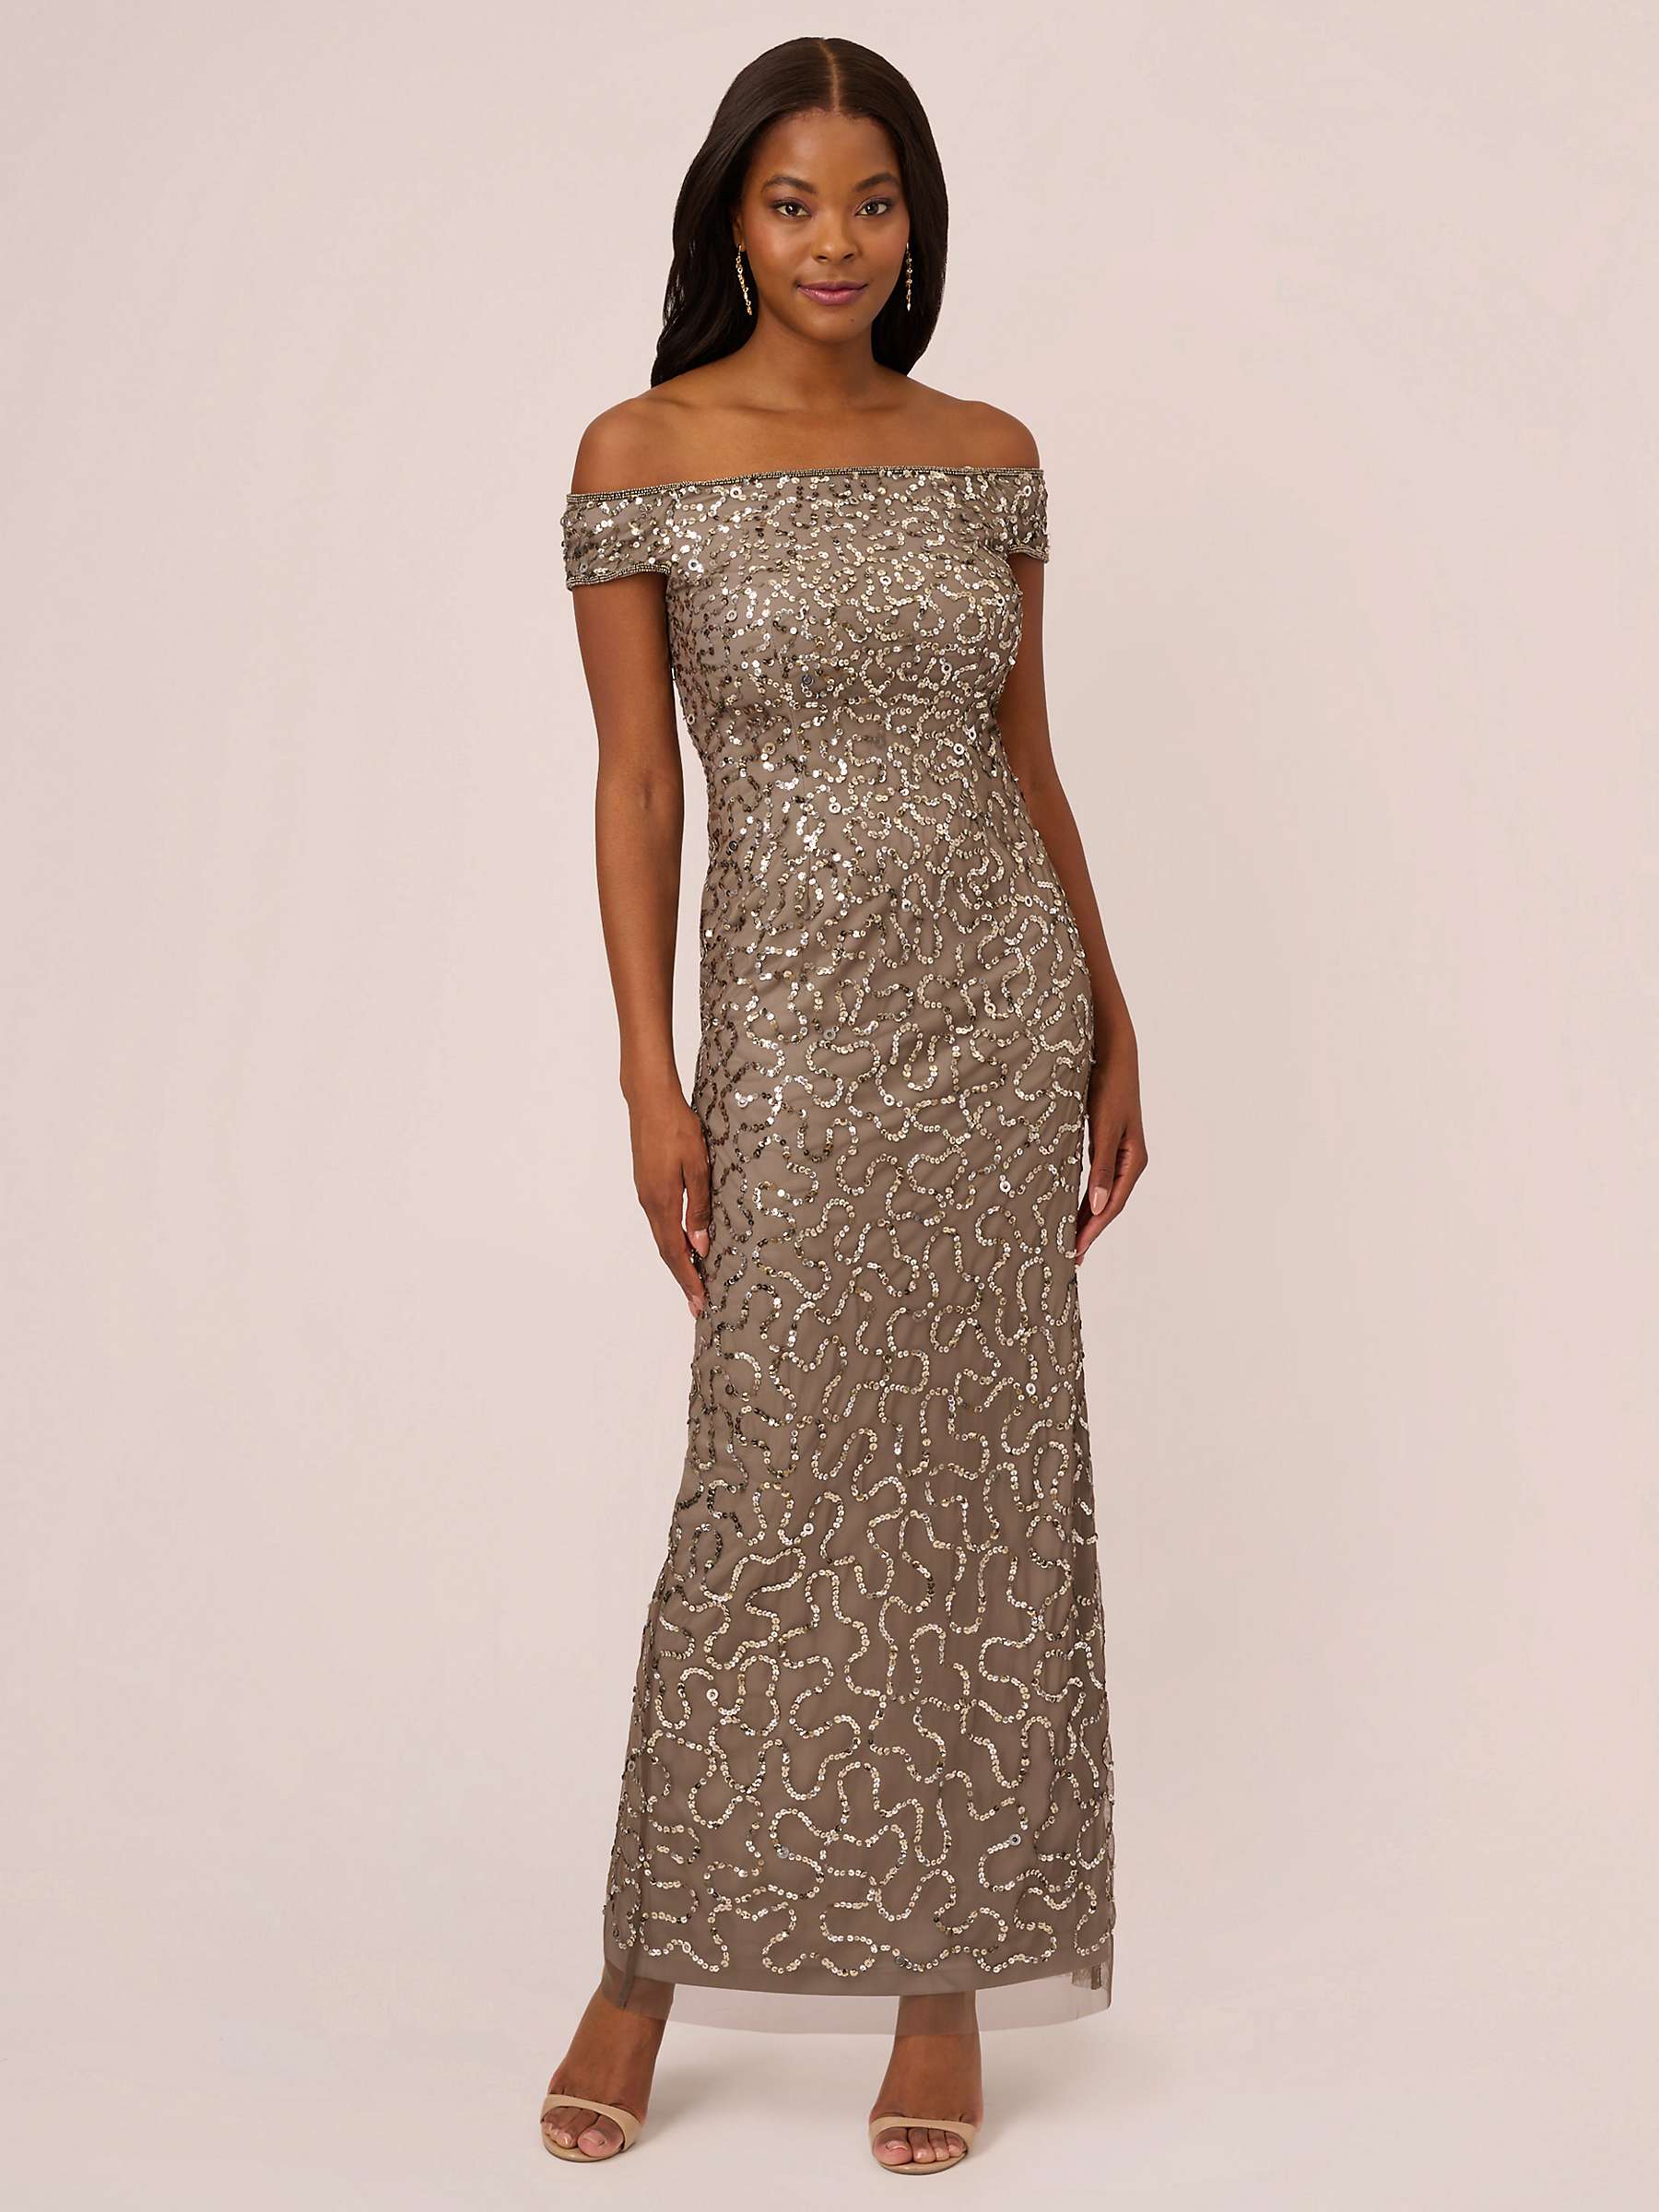 Buy Adrianna Papell Papell Studio Beaded Off the Shoulder Dress, Lead Online at johnlewis.com